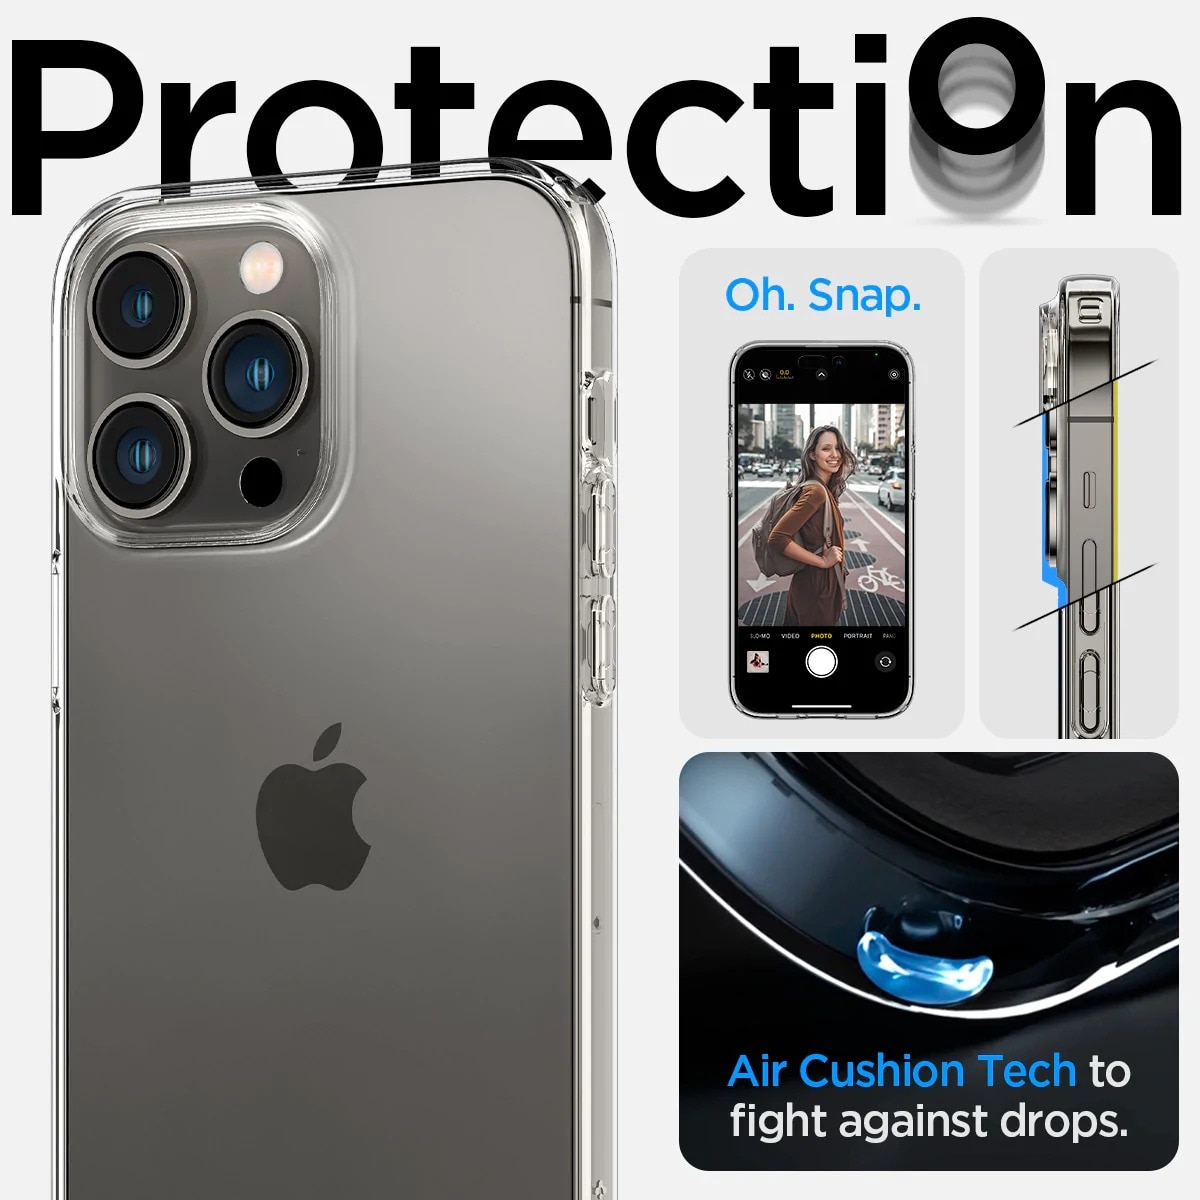 Case Liquid iPhone 14 Pro Max Crystal Clear